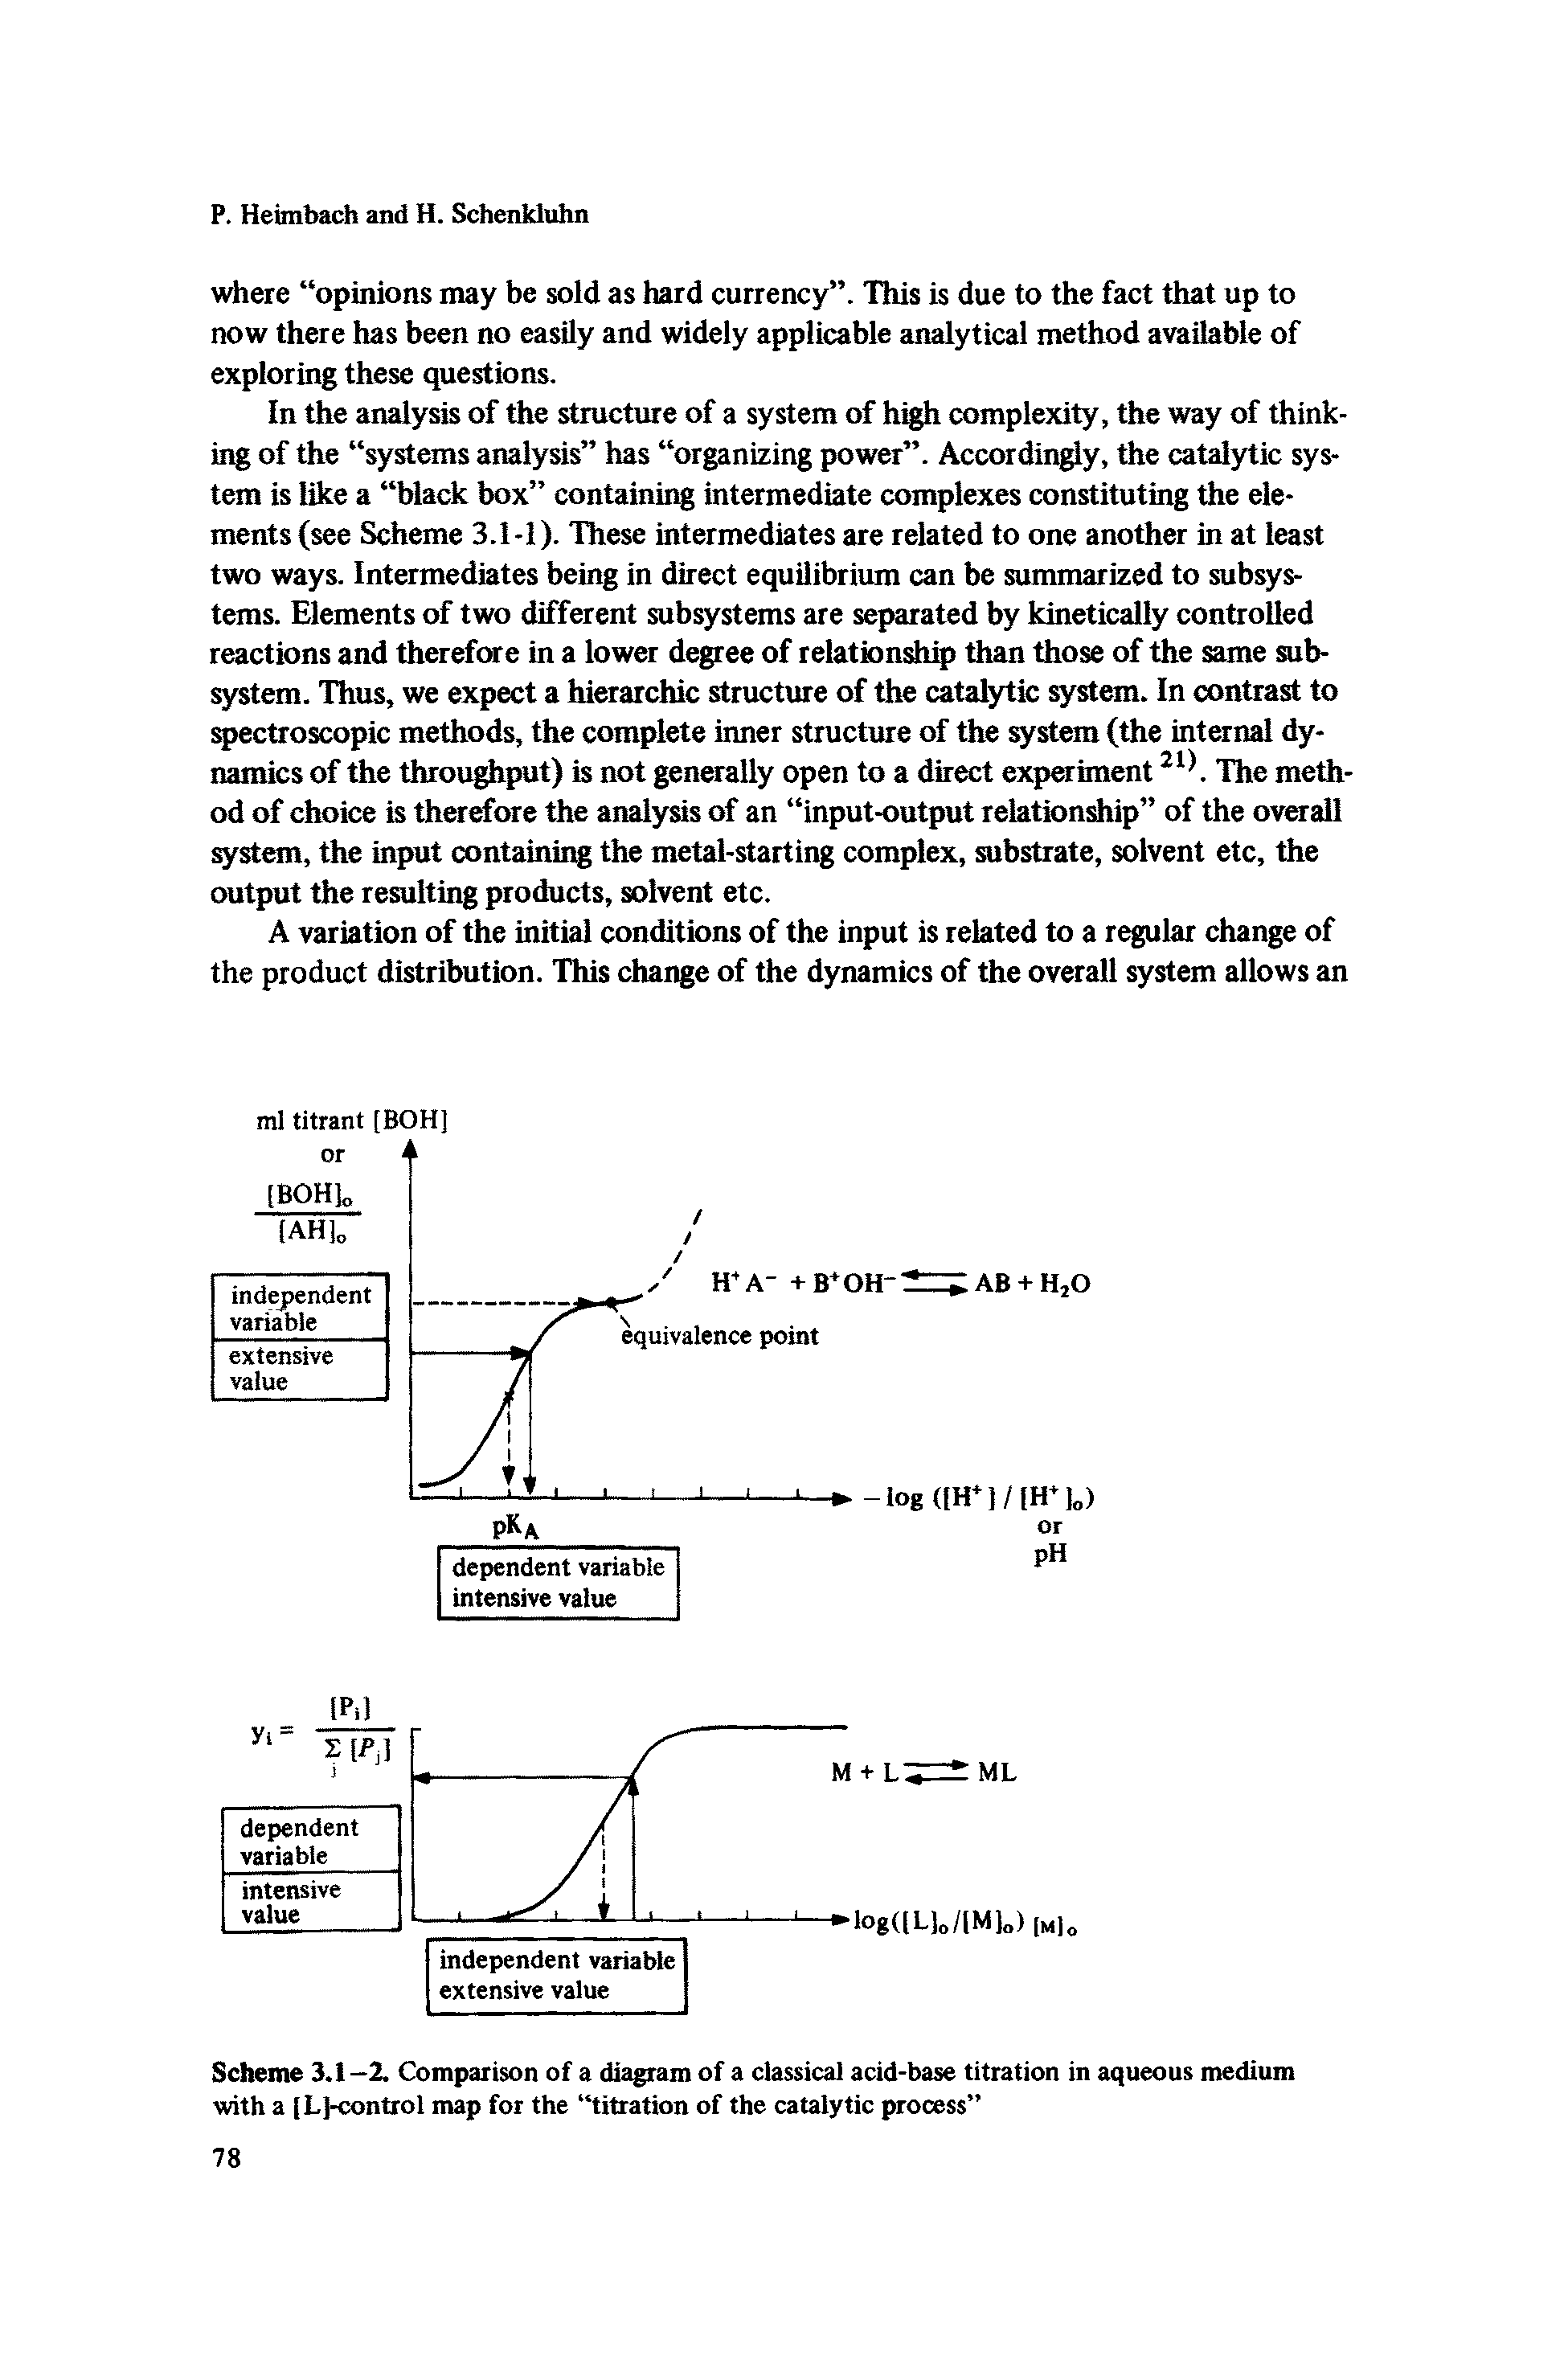 Scheme 3.1-2. Comparison of a diagram of a classical acid-base titration in aqueous medium with a [L]-control map for the titration of the catalytic process ...